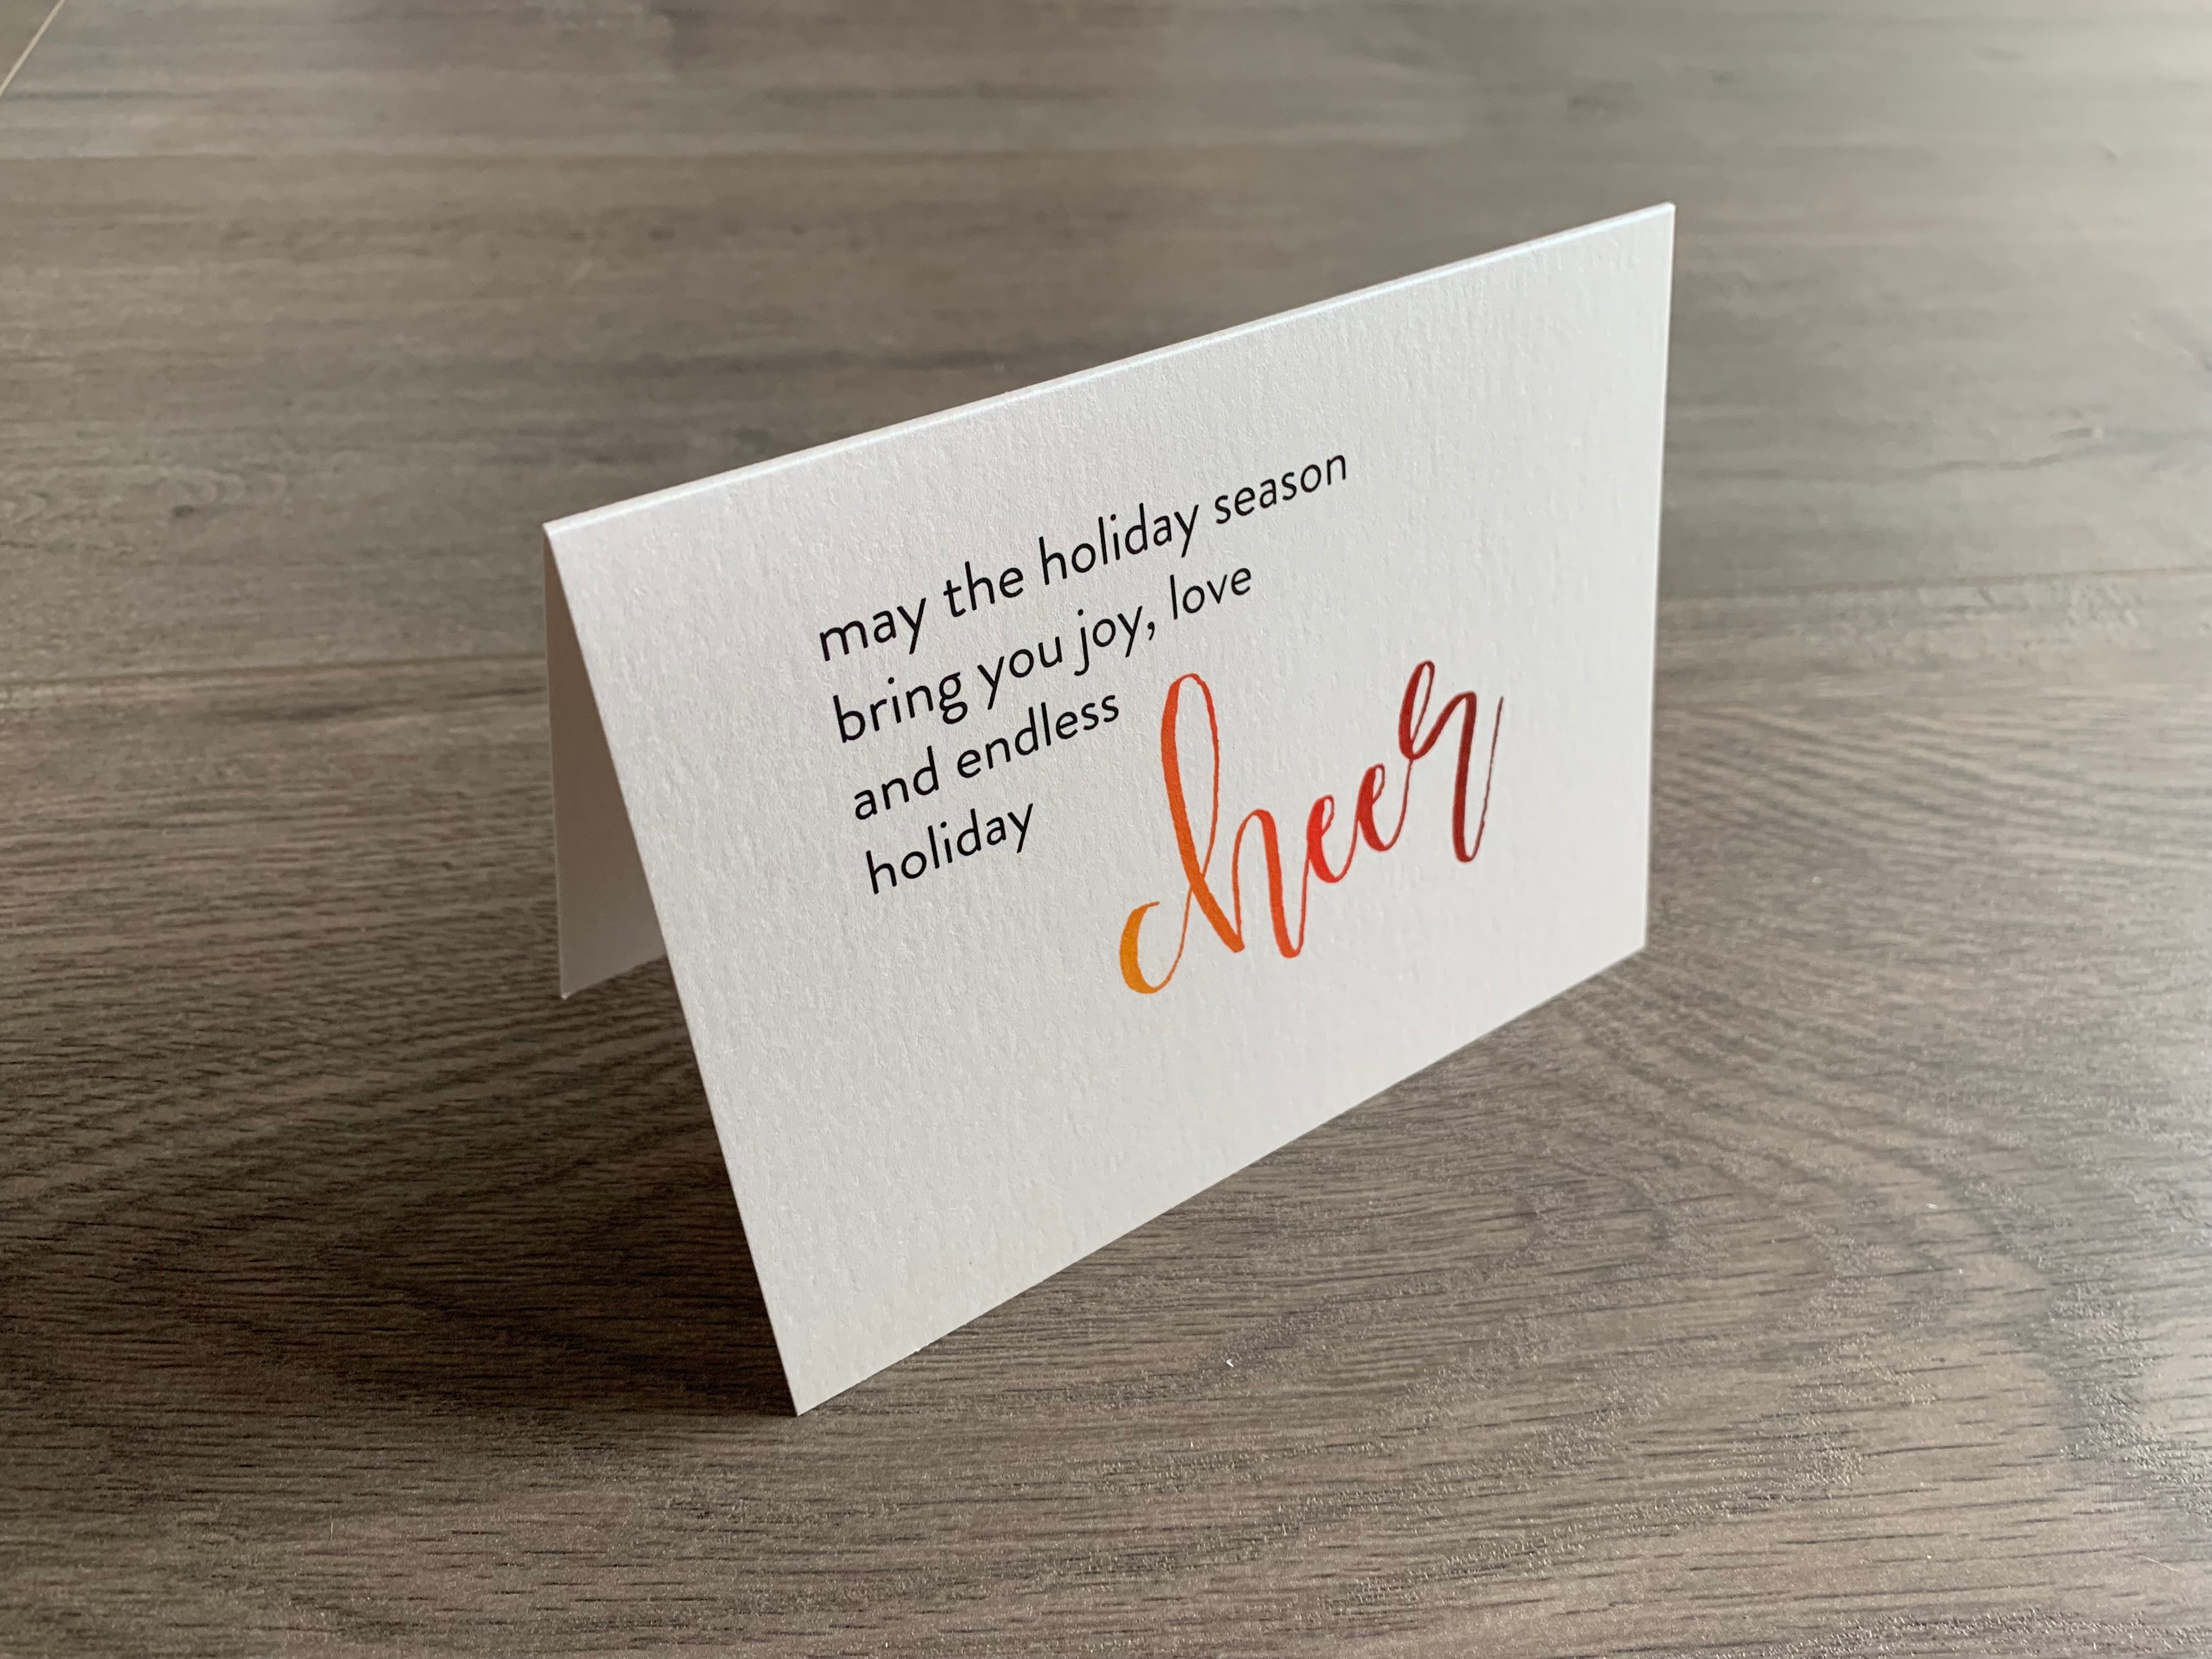 A folded notecard is propped up on a gray wood floor. The notecard is of a cream-colored pearlized paper. The card says, "may the holiday season bring you joy, love and endless holiday cheer" Meaning of Christmas collection by Stationare.